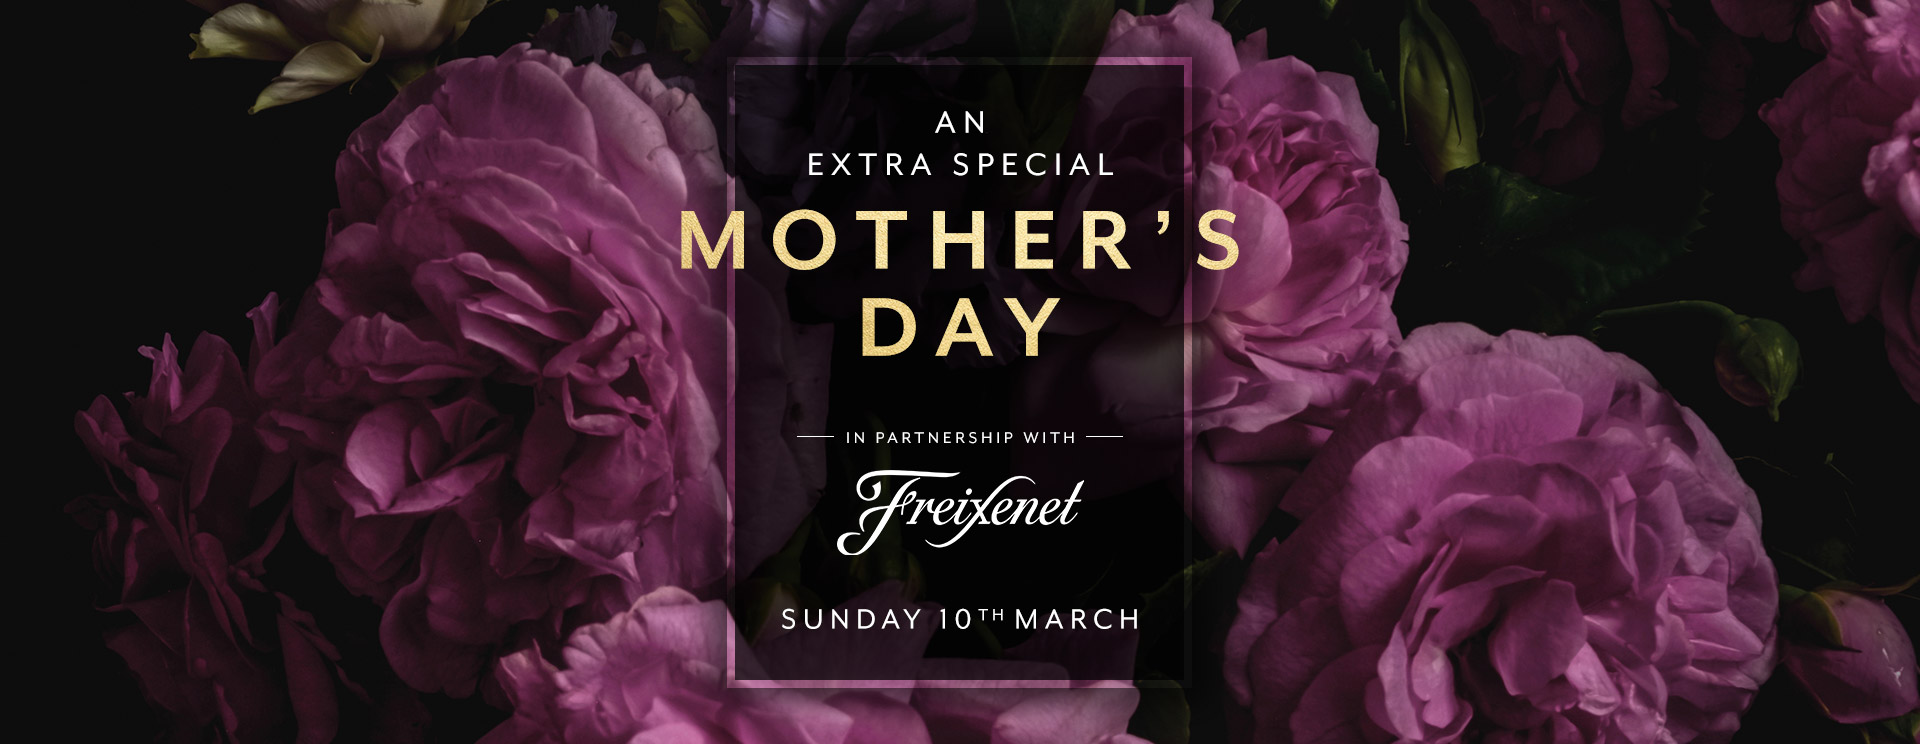 Mother’s Day menu/meal in Cardiff